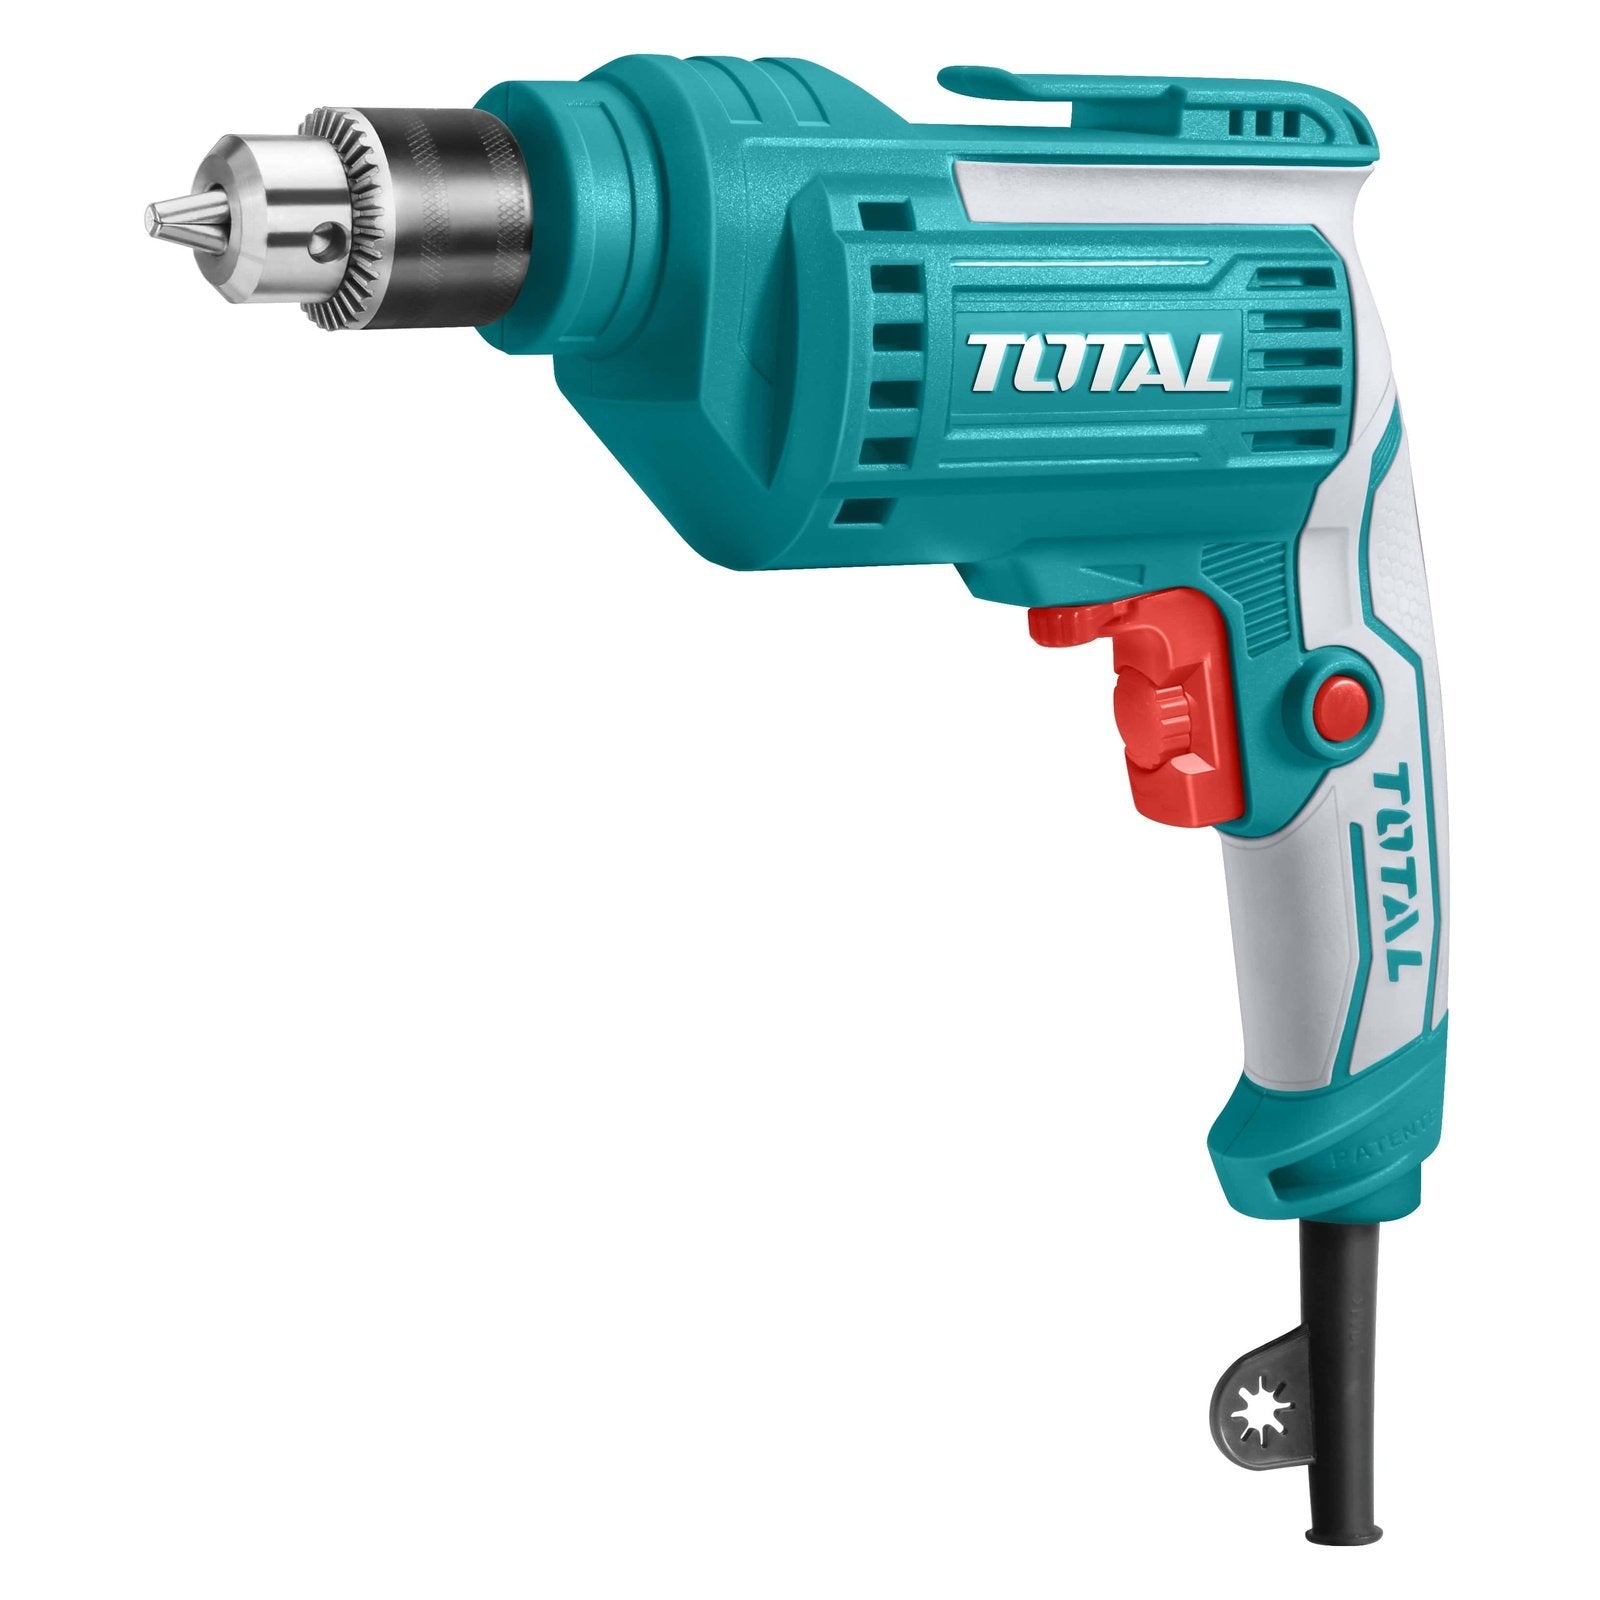 Total Electric Drill 500W - TD2051026 | Supply Master | Accra, Ghana Tools Building Steel Engineering Hardware tool